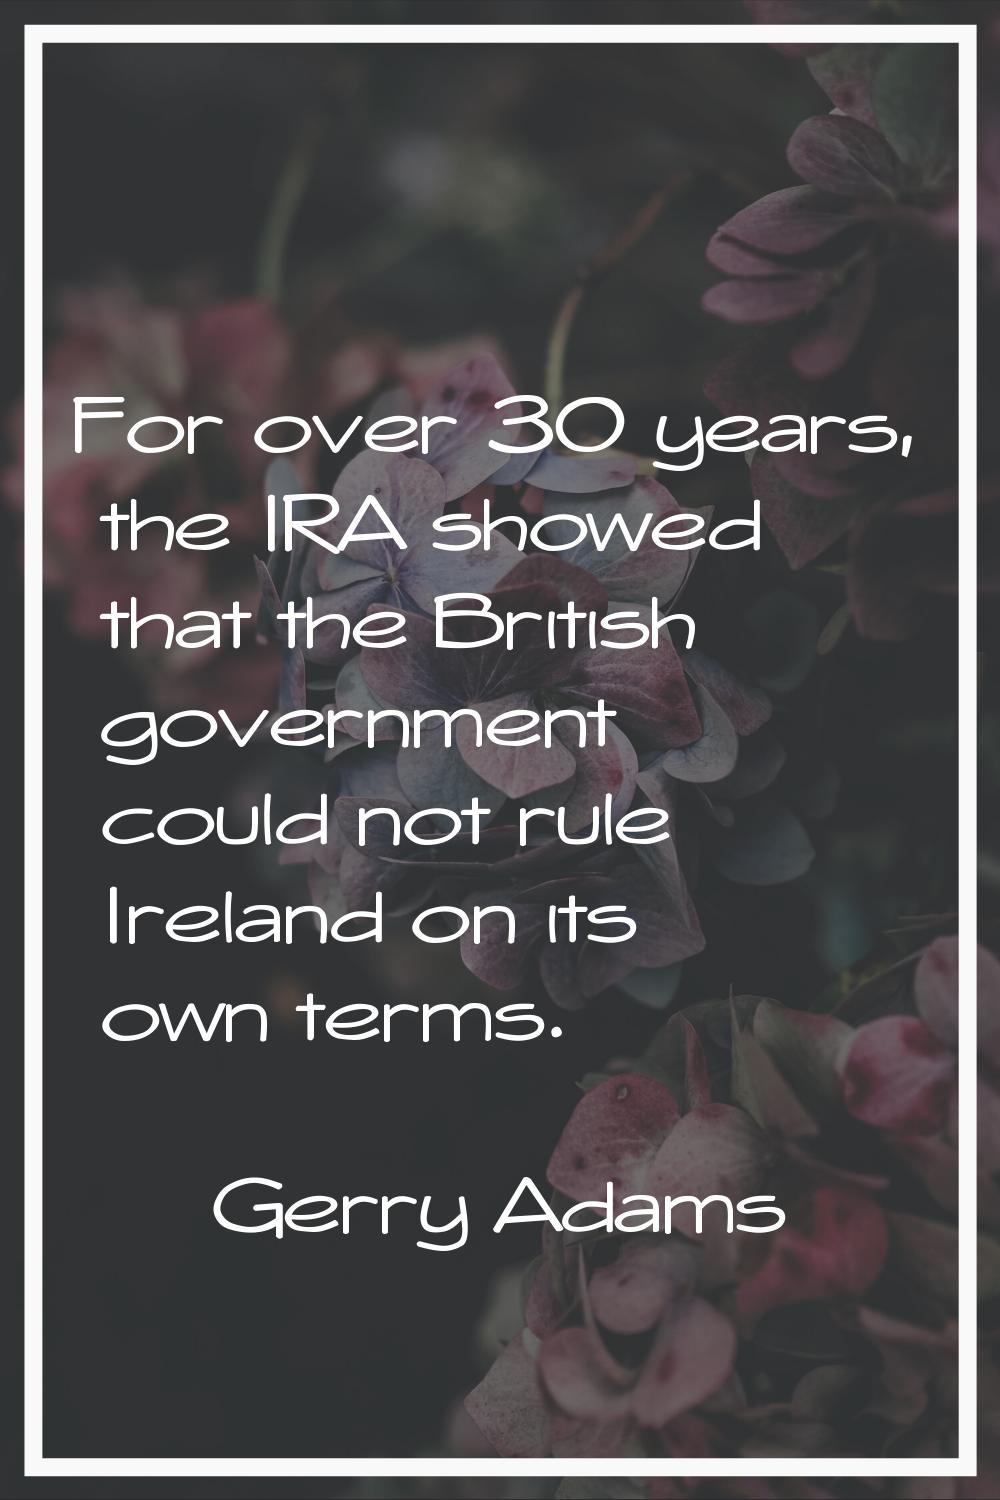 For over 30 years, the IRA showed that the British government could not rule Ireland on its own ter